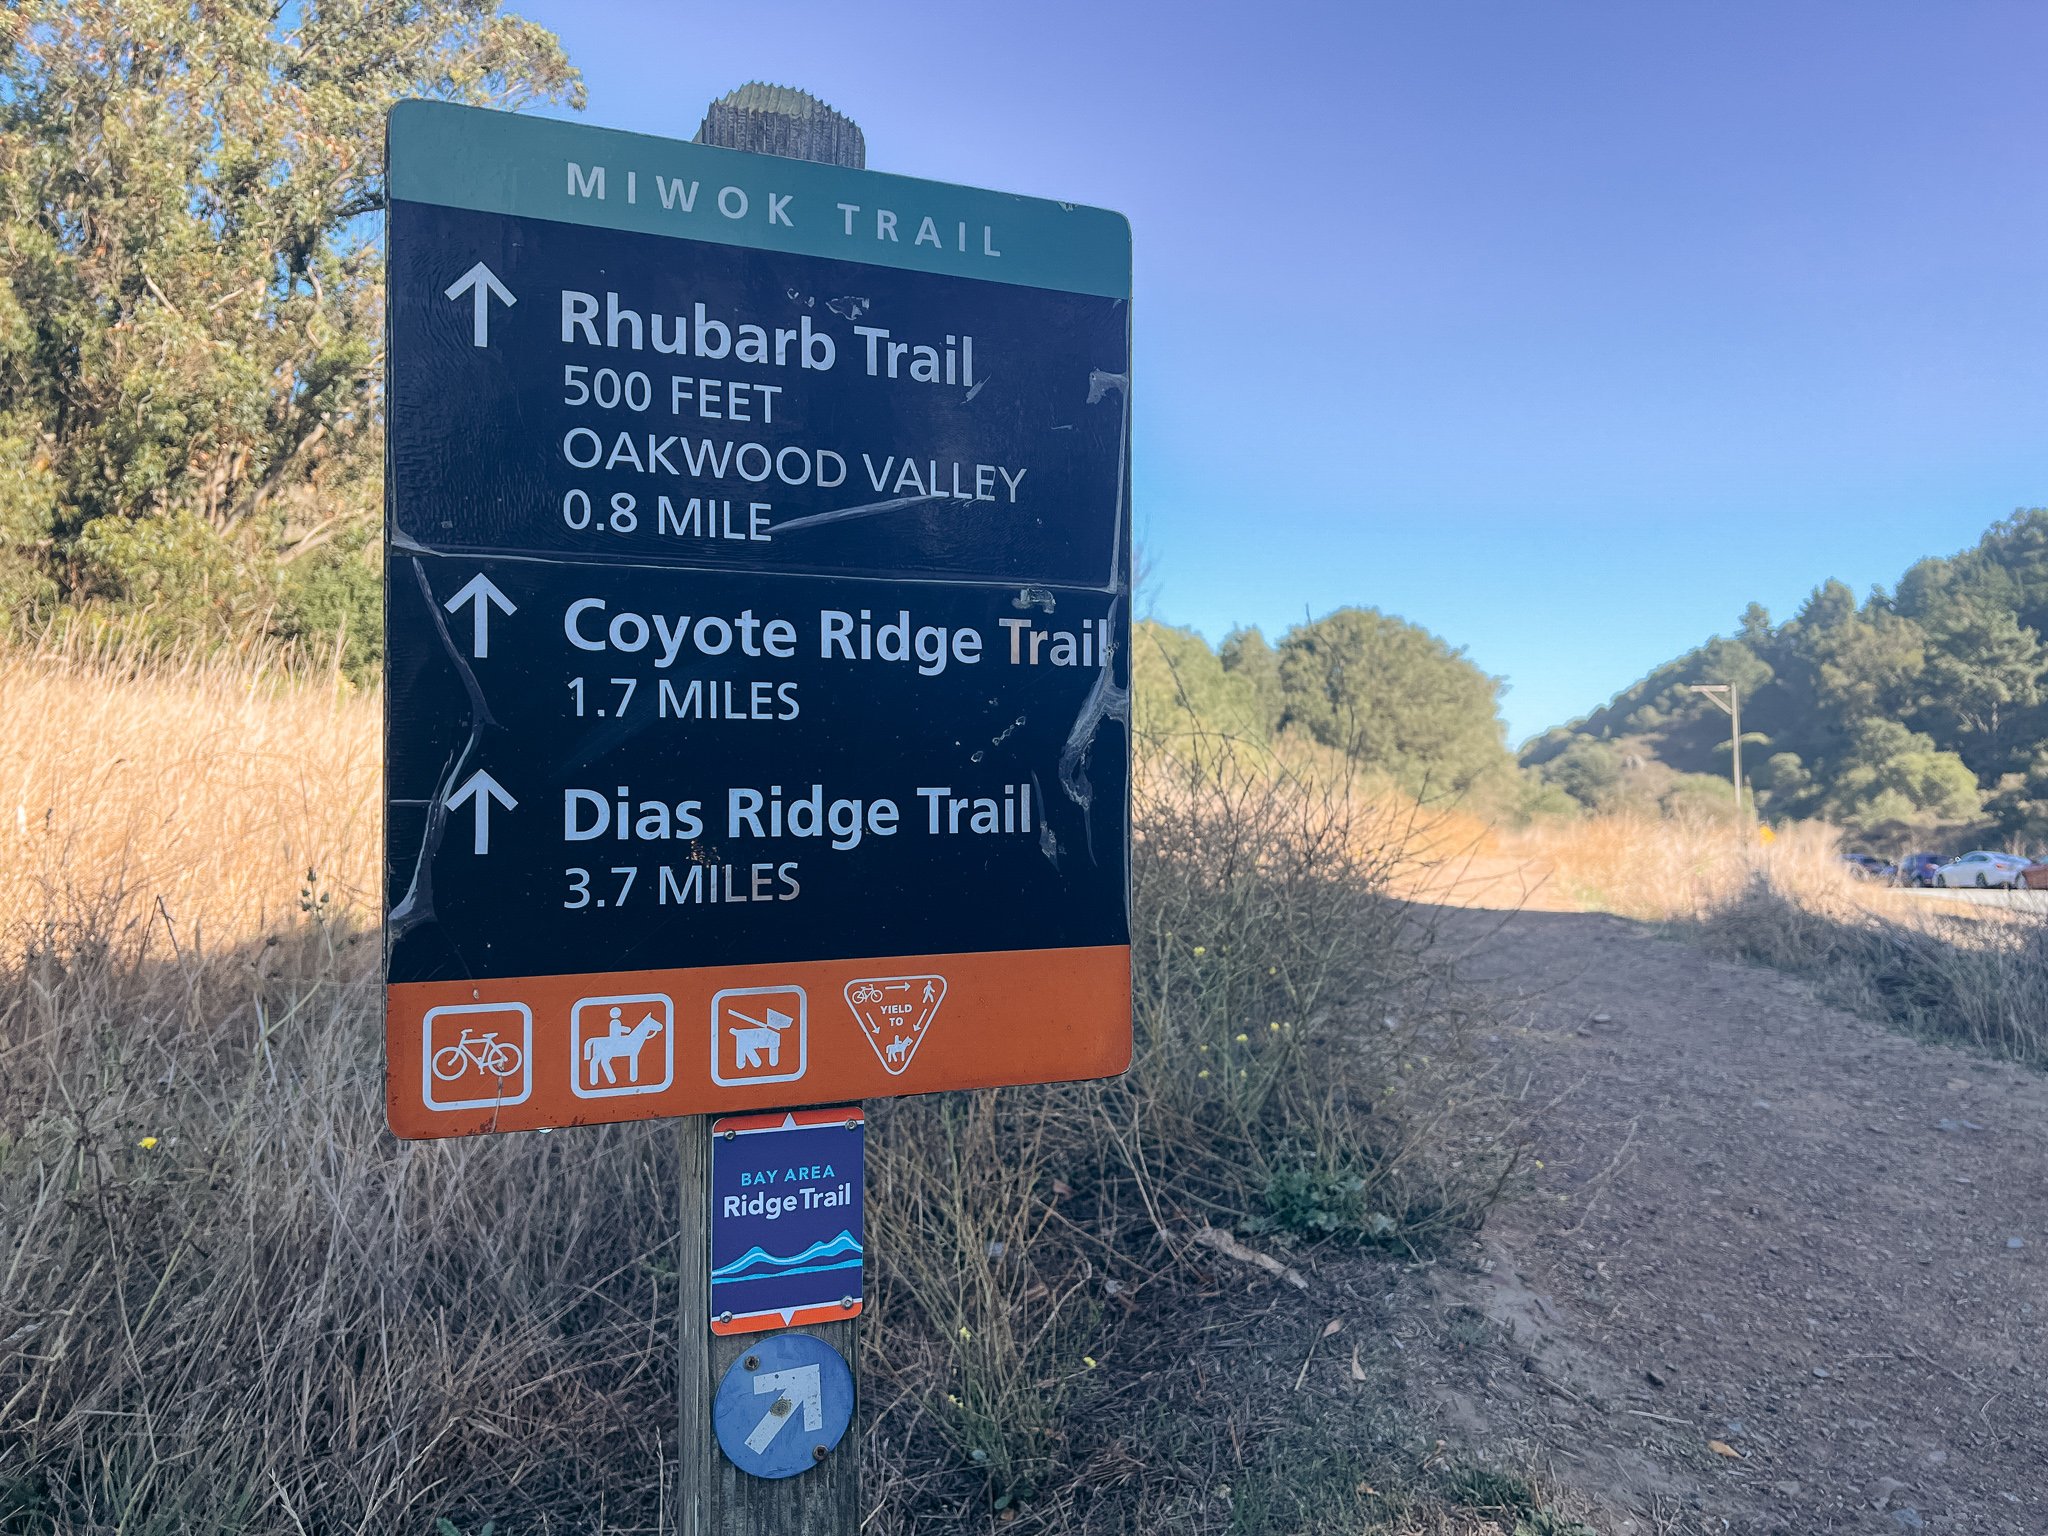  Miwok Trail entrance at Tennessee Valley 